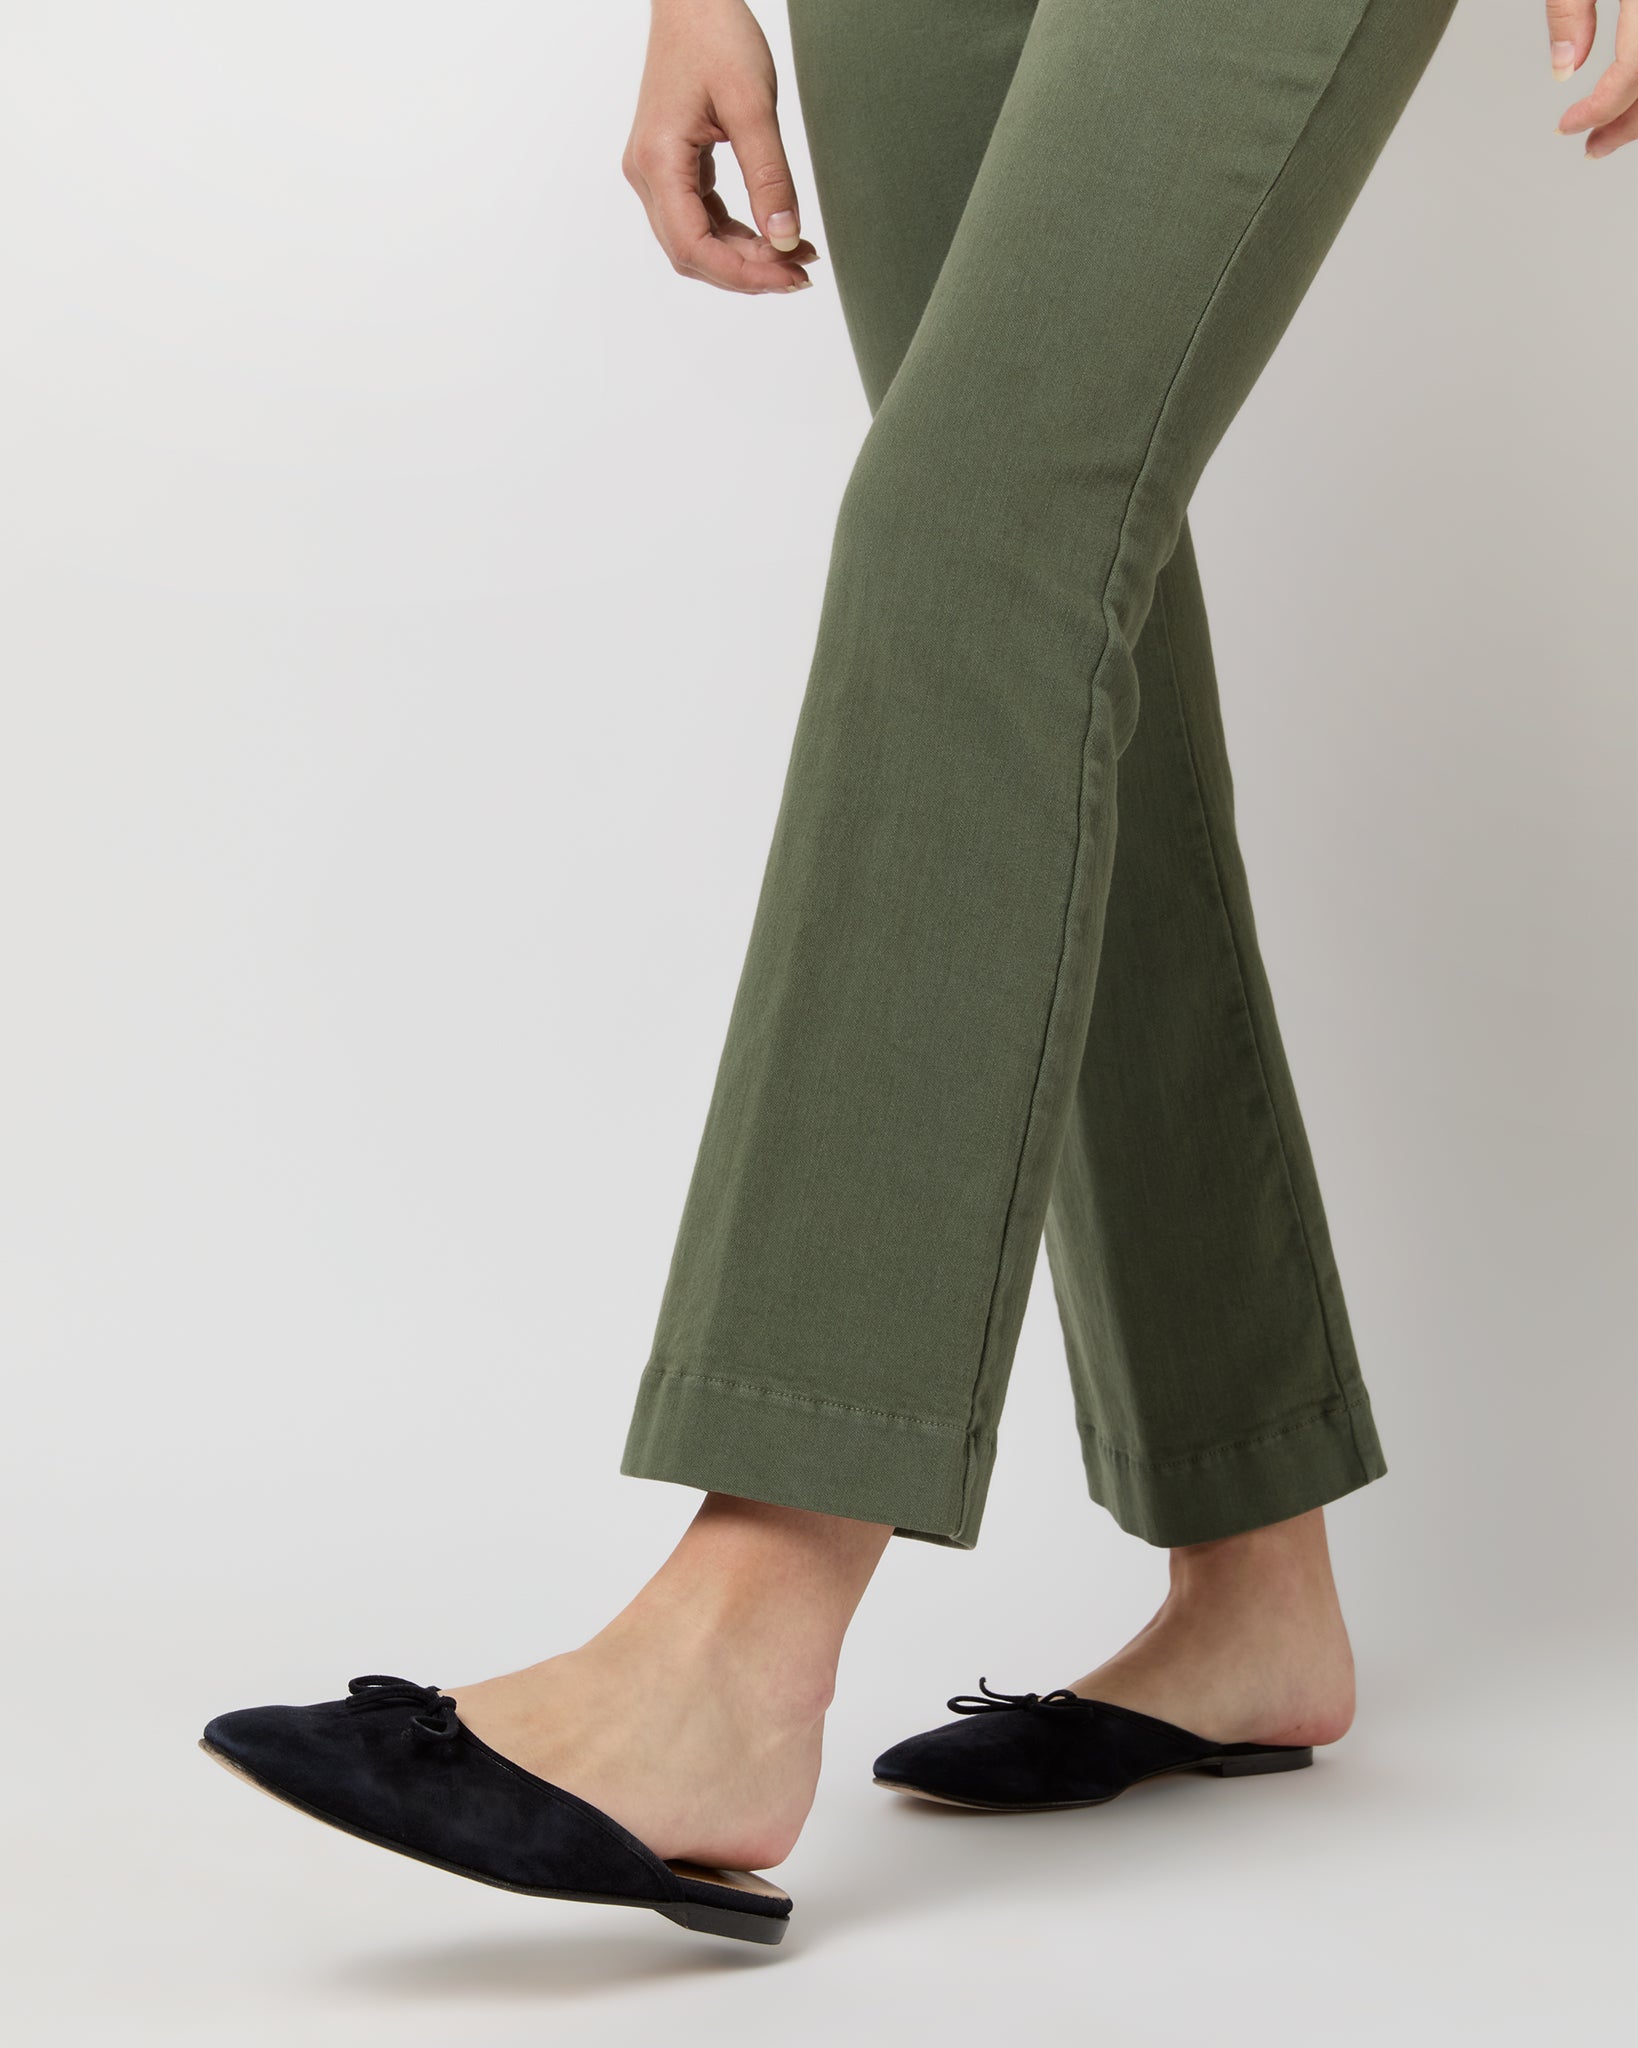 Faye Flare Cropped Pant in Olive Garment-Dyed Stretch Twill